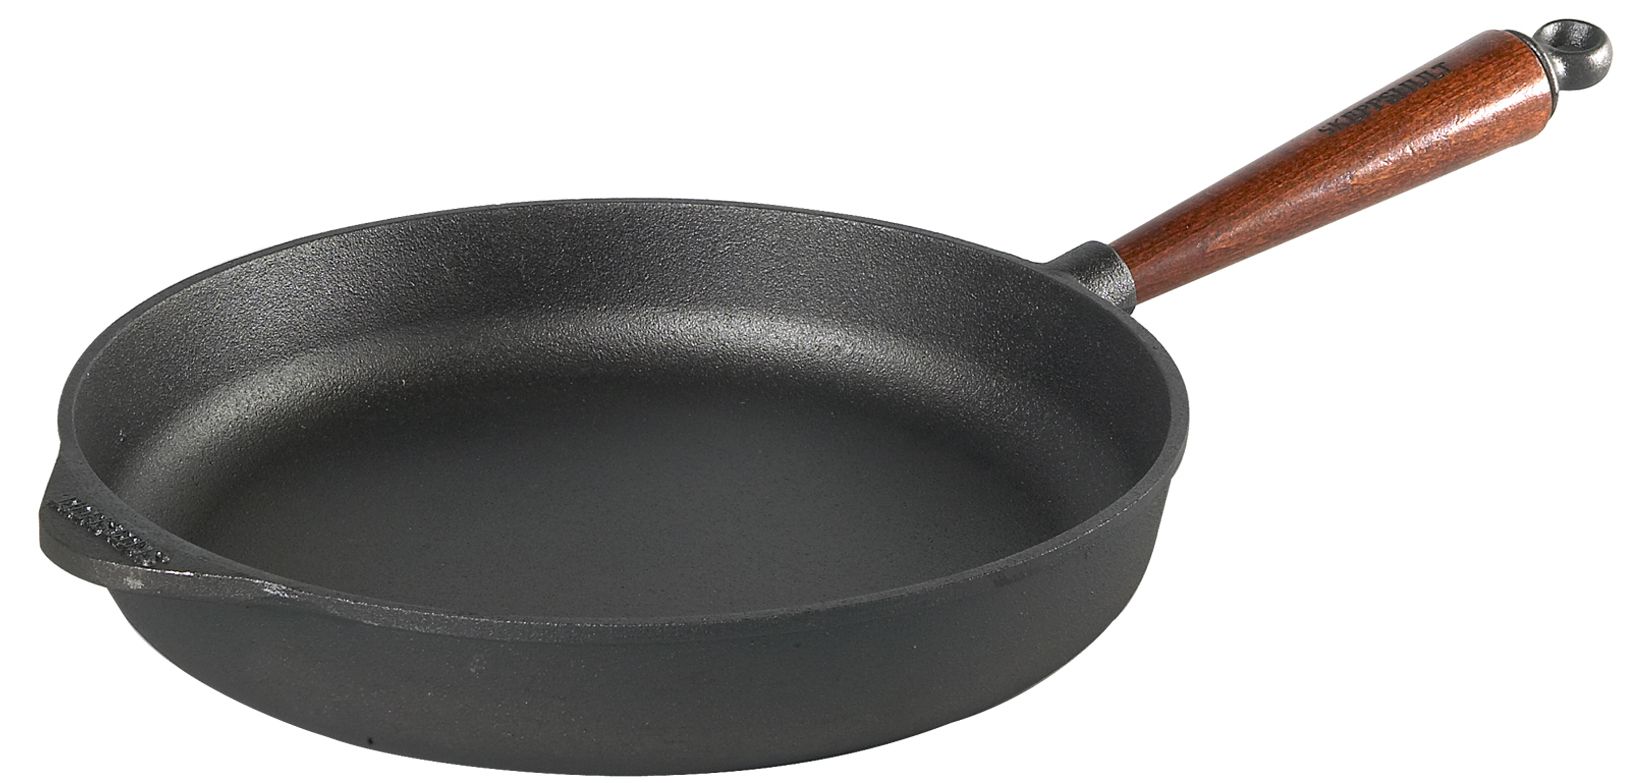 10 Benefits of Using a Cast Iron Skillet For Cooking.